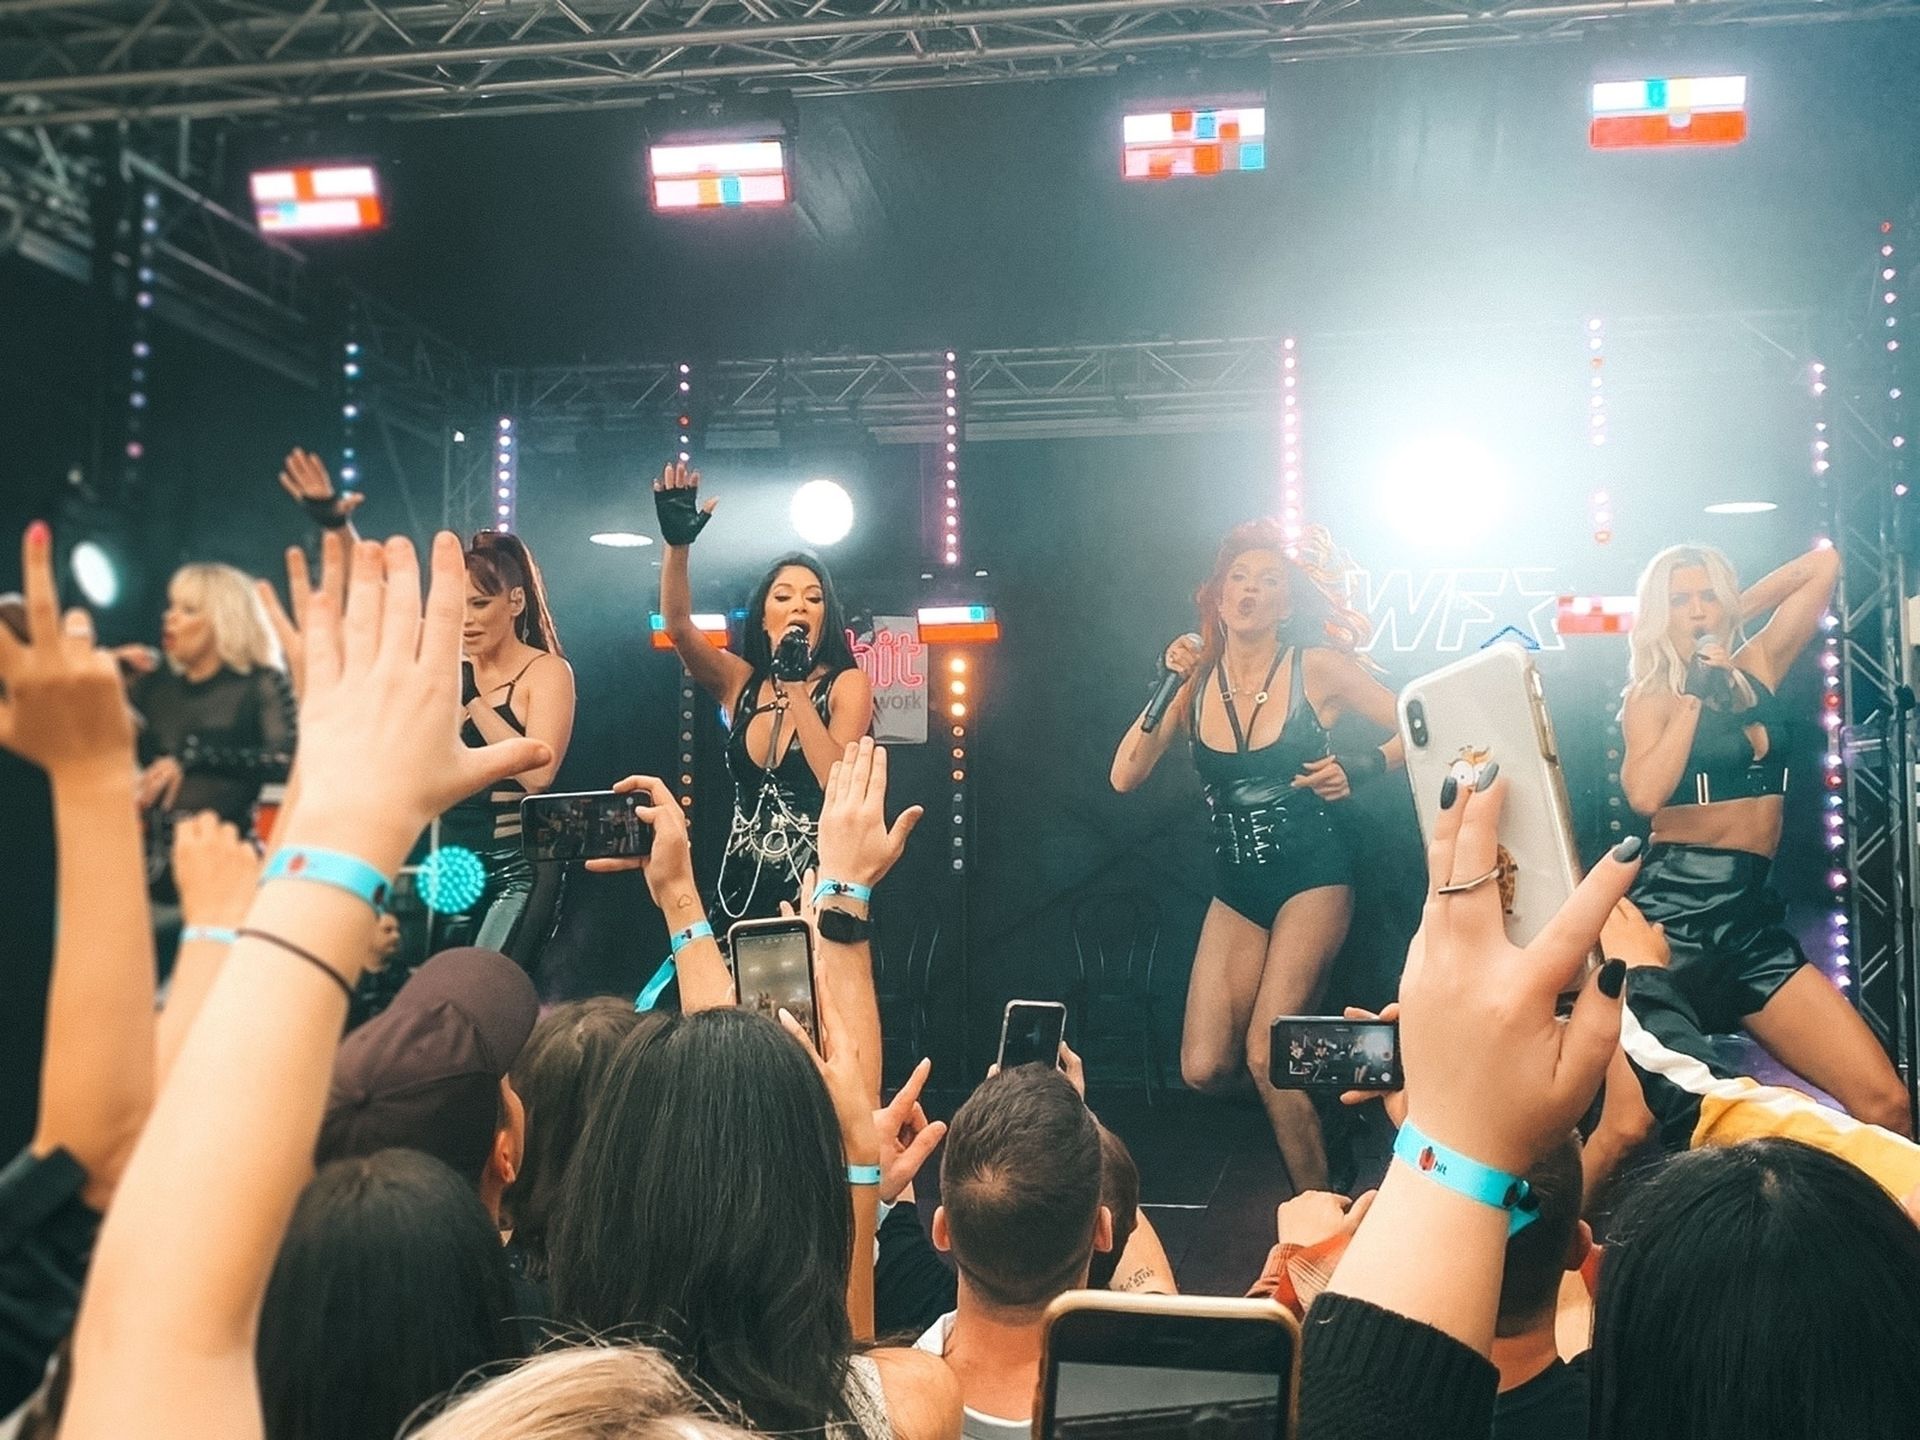 The Pussycat Dolls Perform Live at the Rooftop in Melbourne (23 Photos)